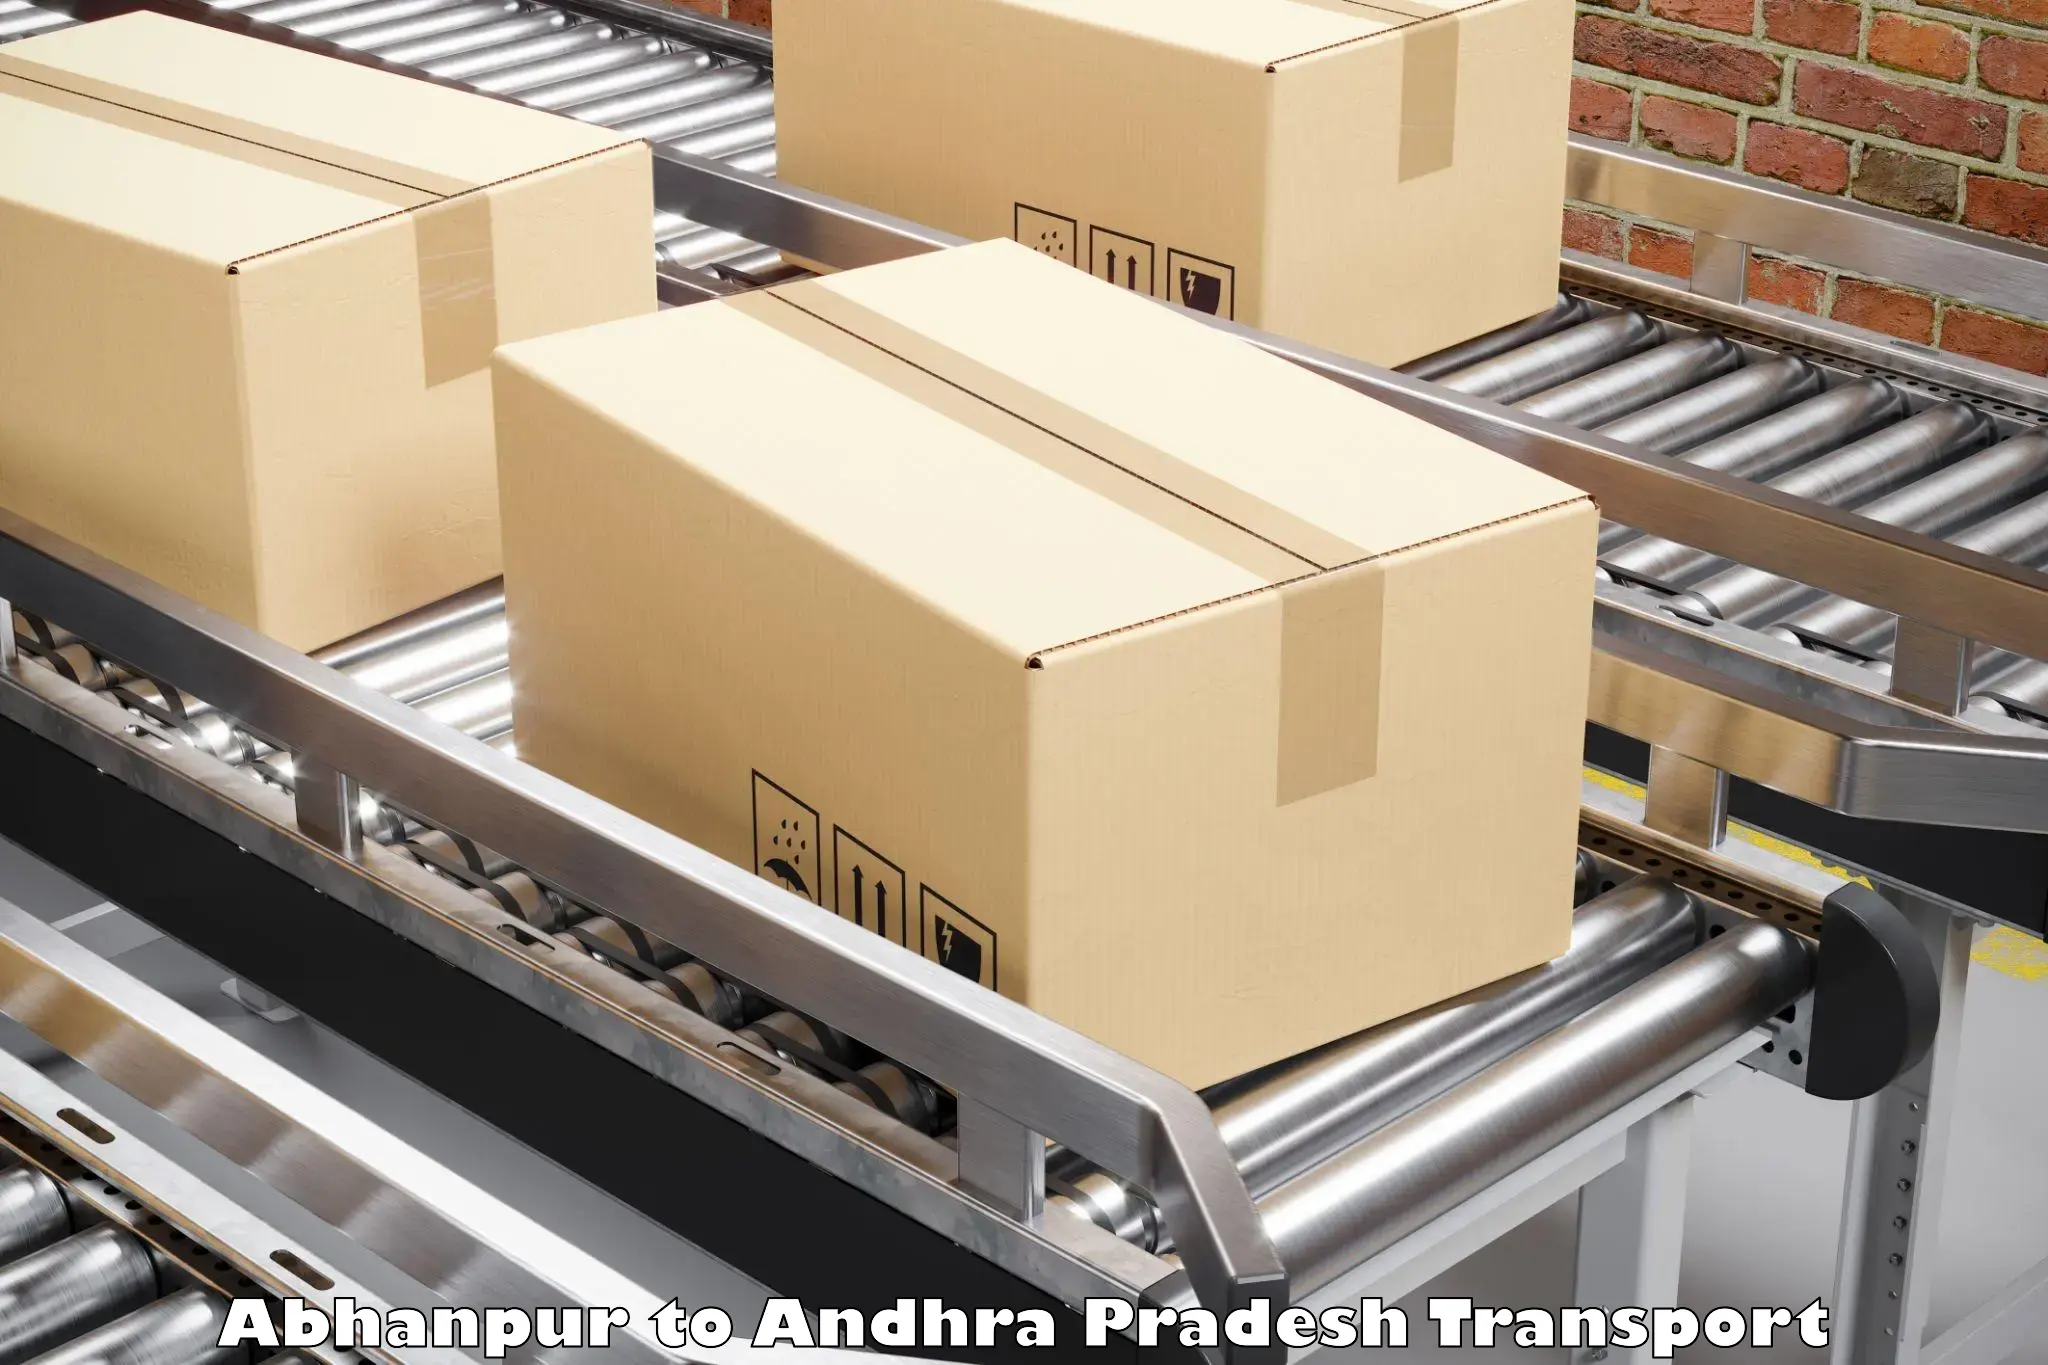 Daily parcel service transport Abhanpur to Inkollu